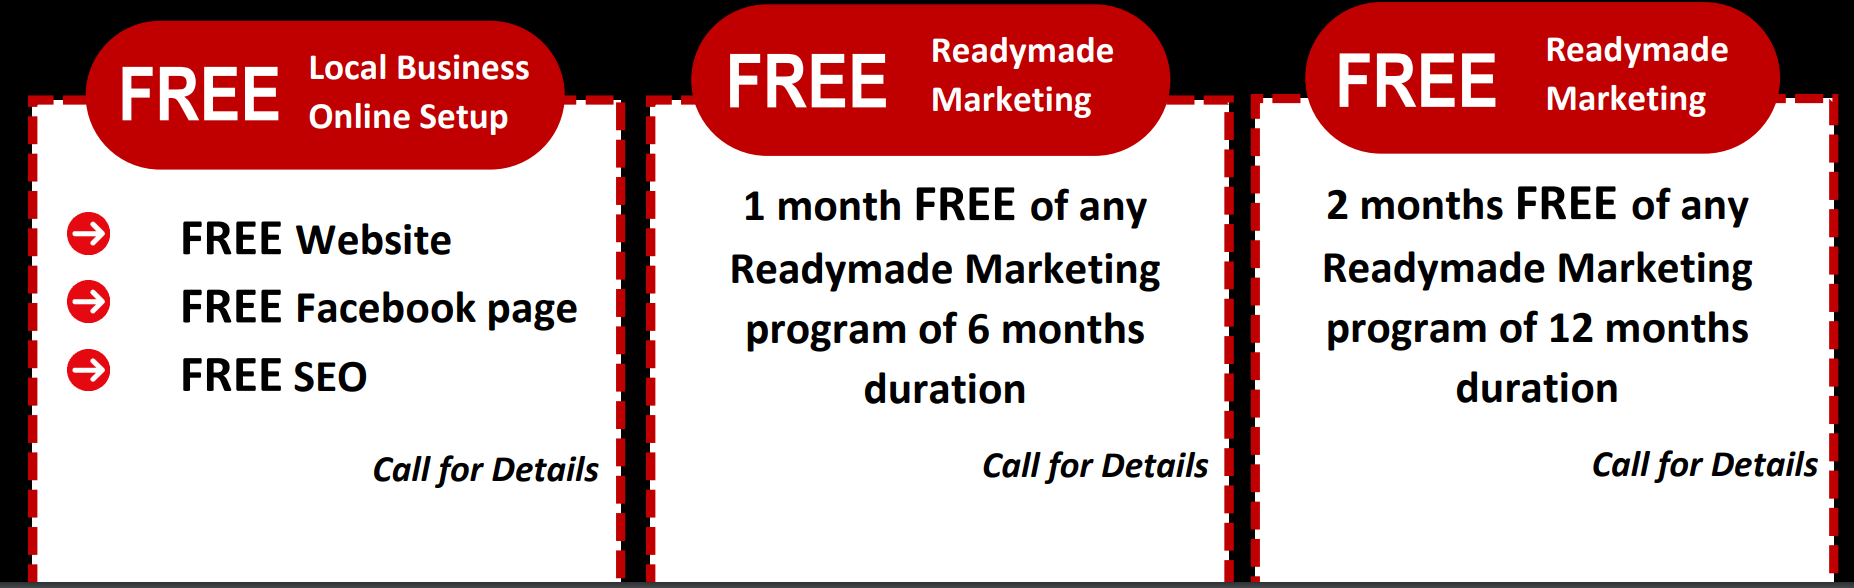 Two Months of Free Marketing